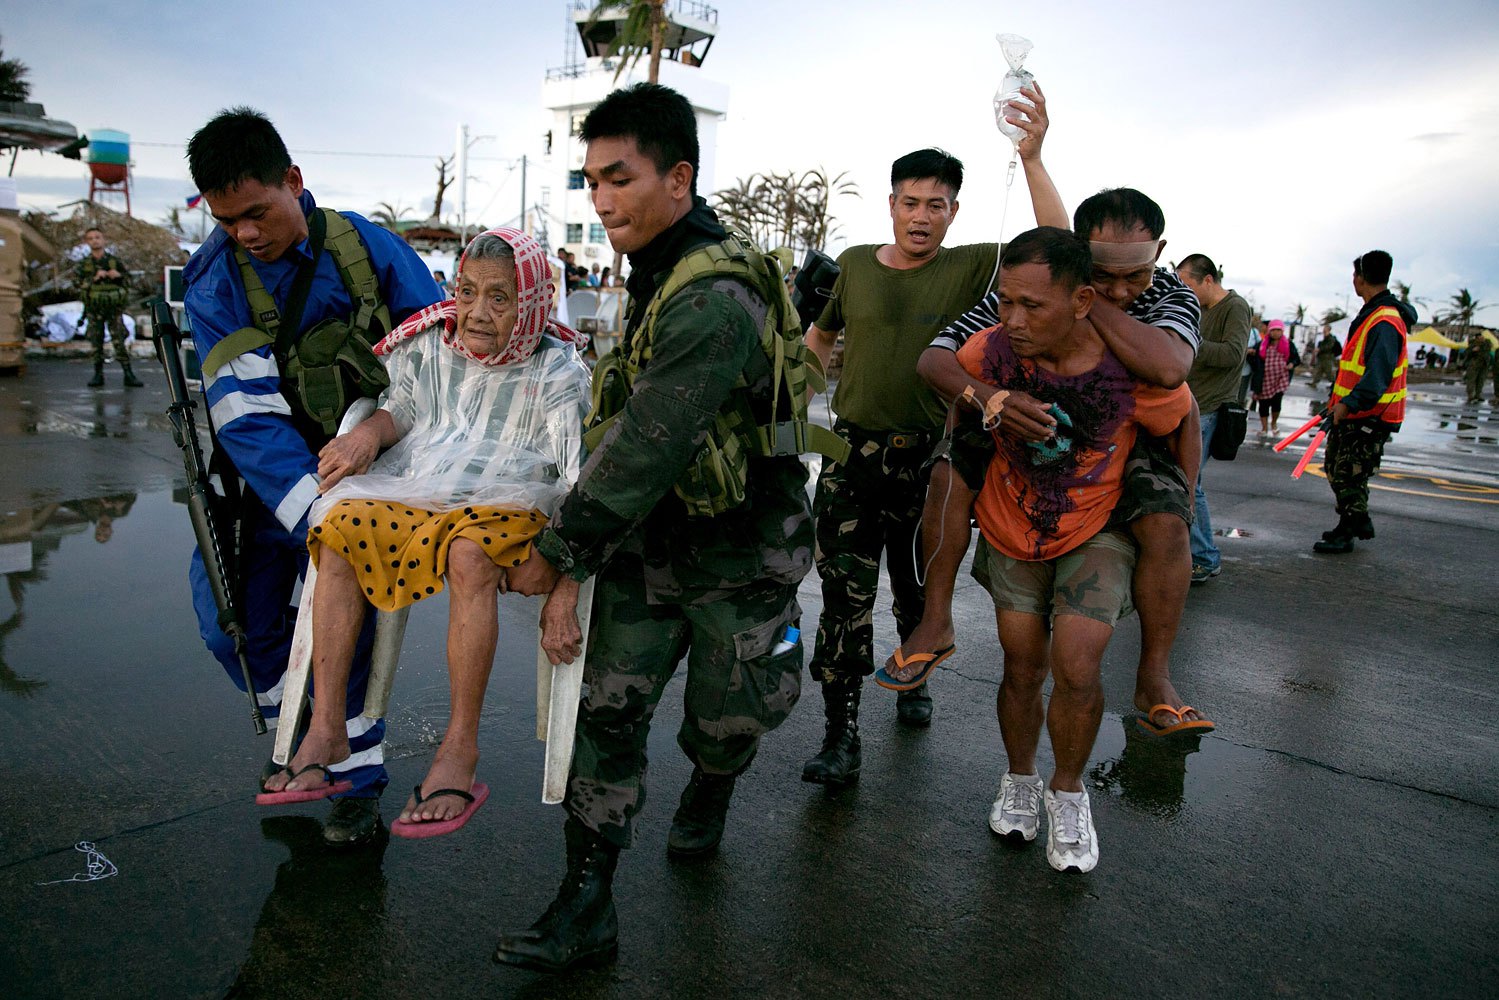 An elderly lady and an injured man are carried to a waiting C130 aircraft during the evacuation of hundreds of survivors of Typhoon Haiyan on November 12, 2013 in Tacloban, Philippines.